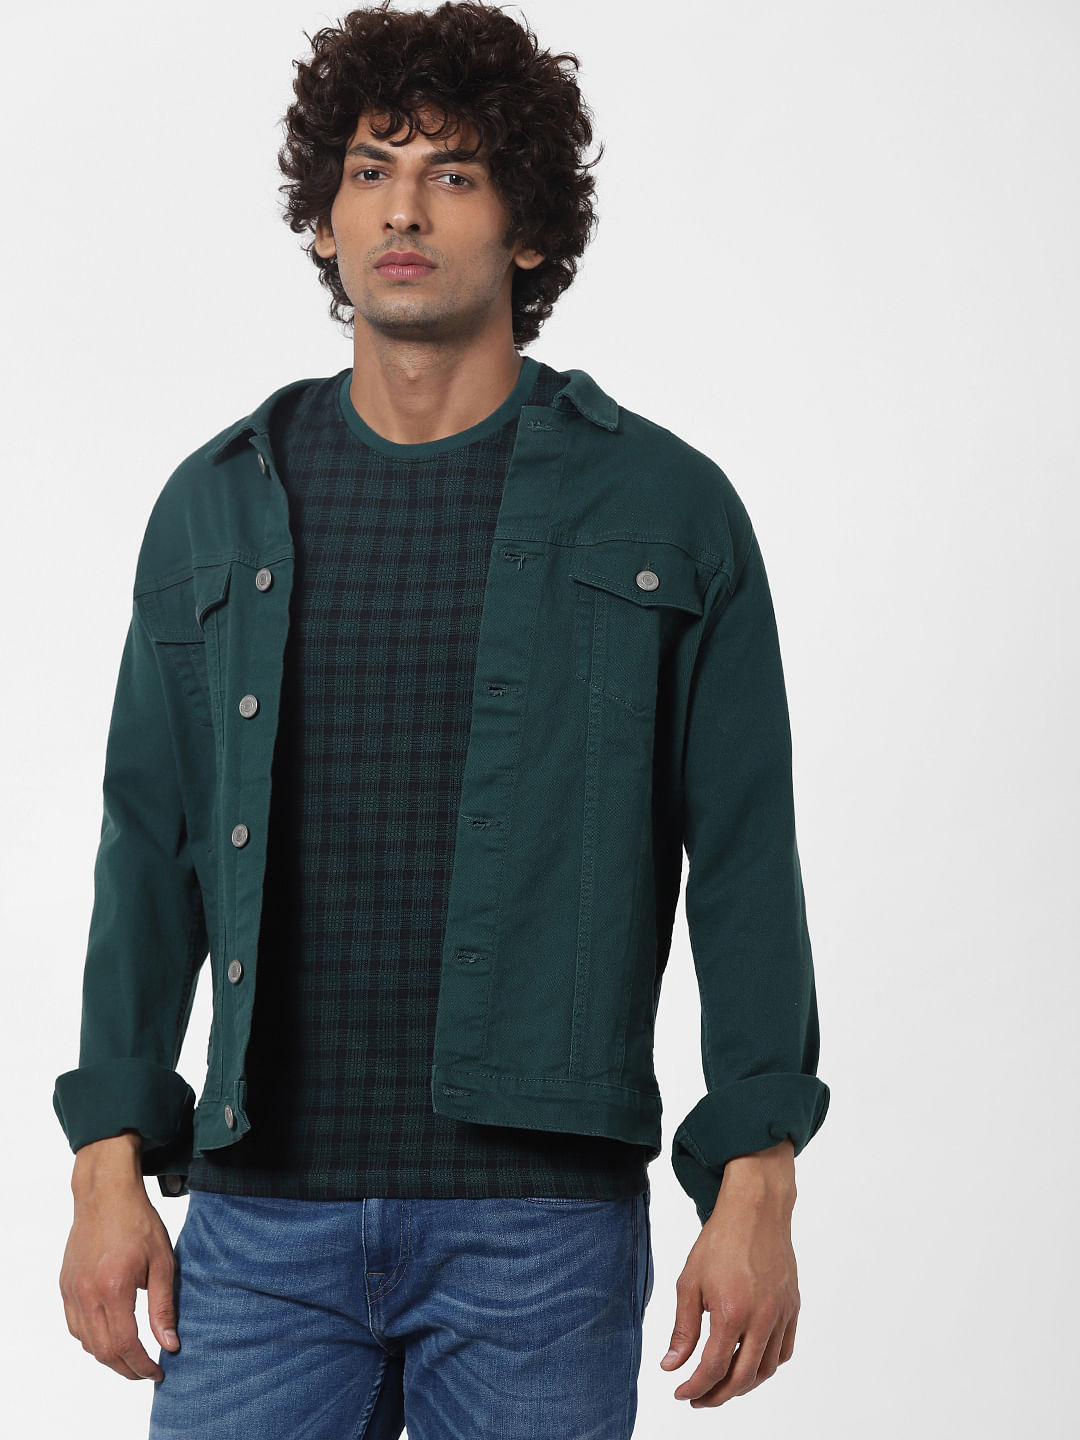 Thoughts on the denim jacket paired with dark green turtleneck? :  r/mensfashion